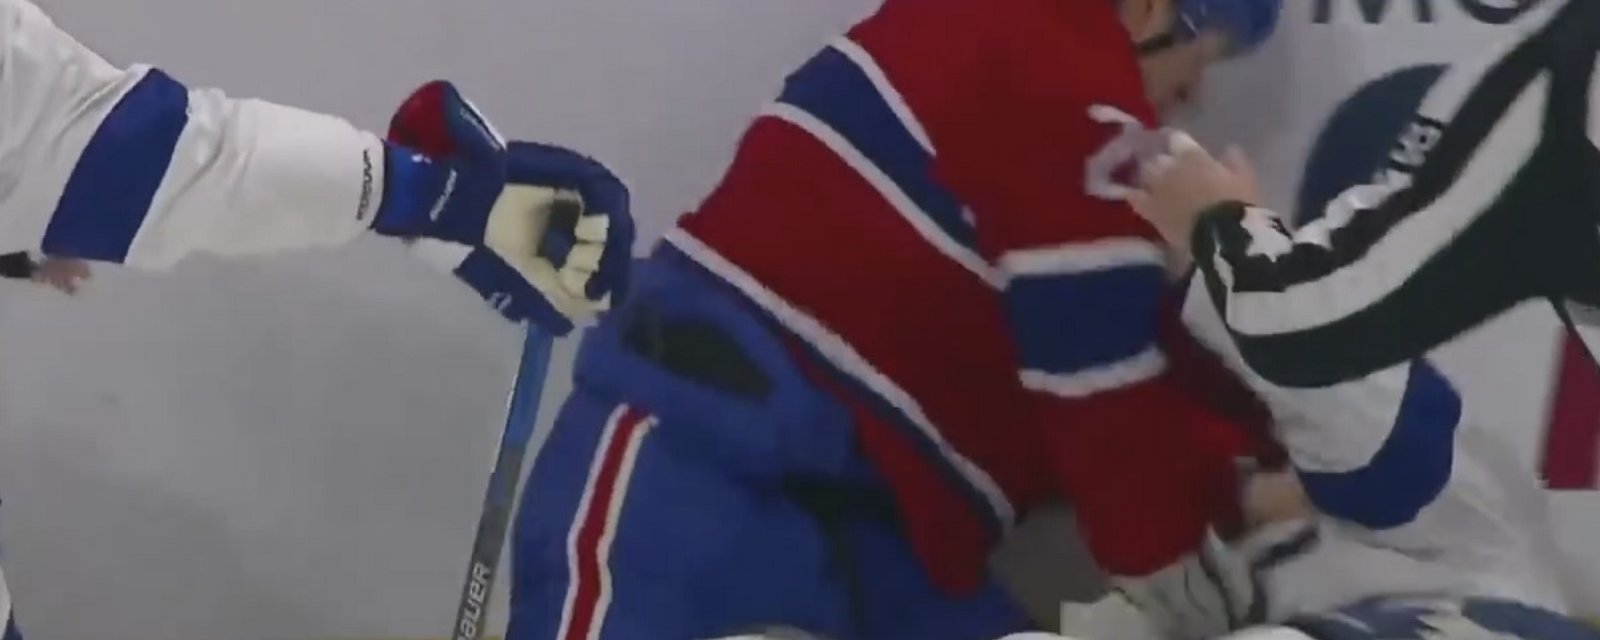 Beaulieu drops gloves to defend Carey Price and drops his opponent as well!